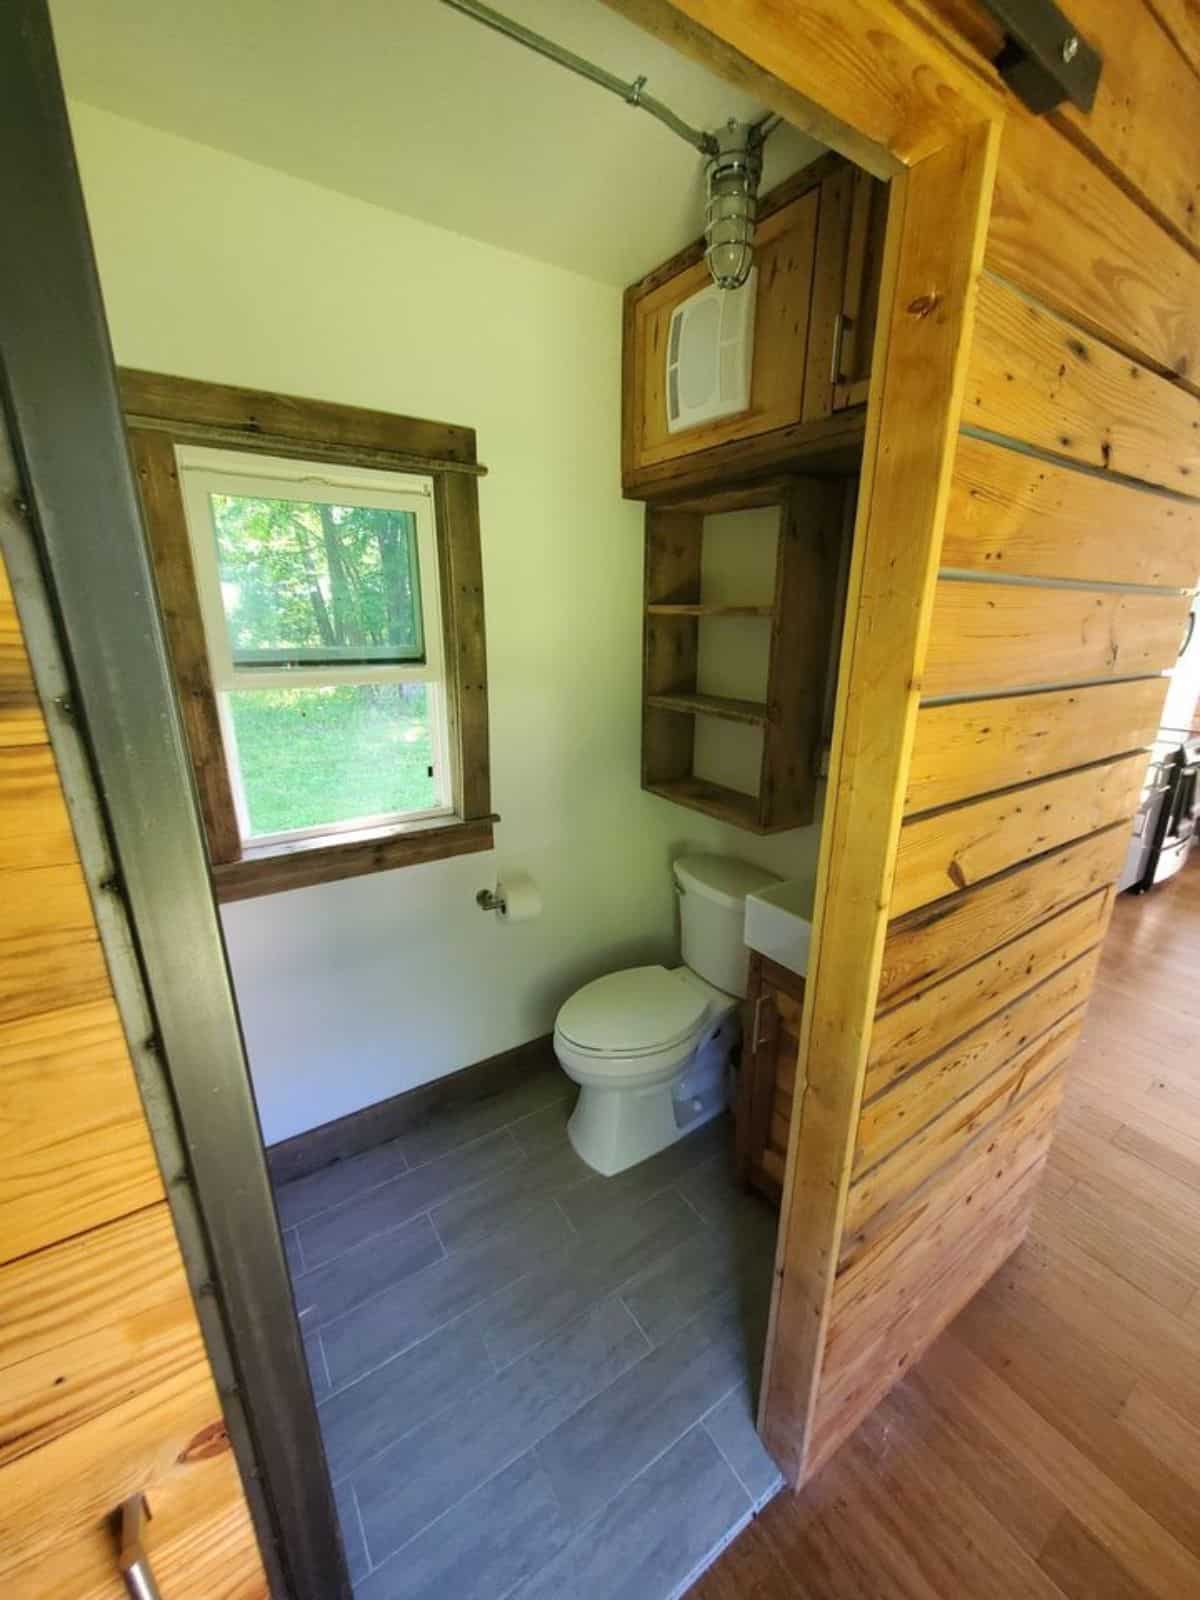 Standard toilet and sink with vanity in bathroom of 40' Luxury Shipping Container Tiny Home